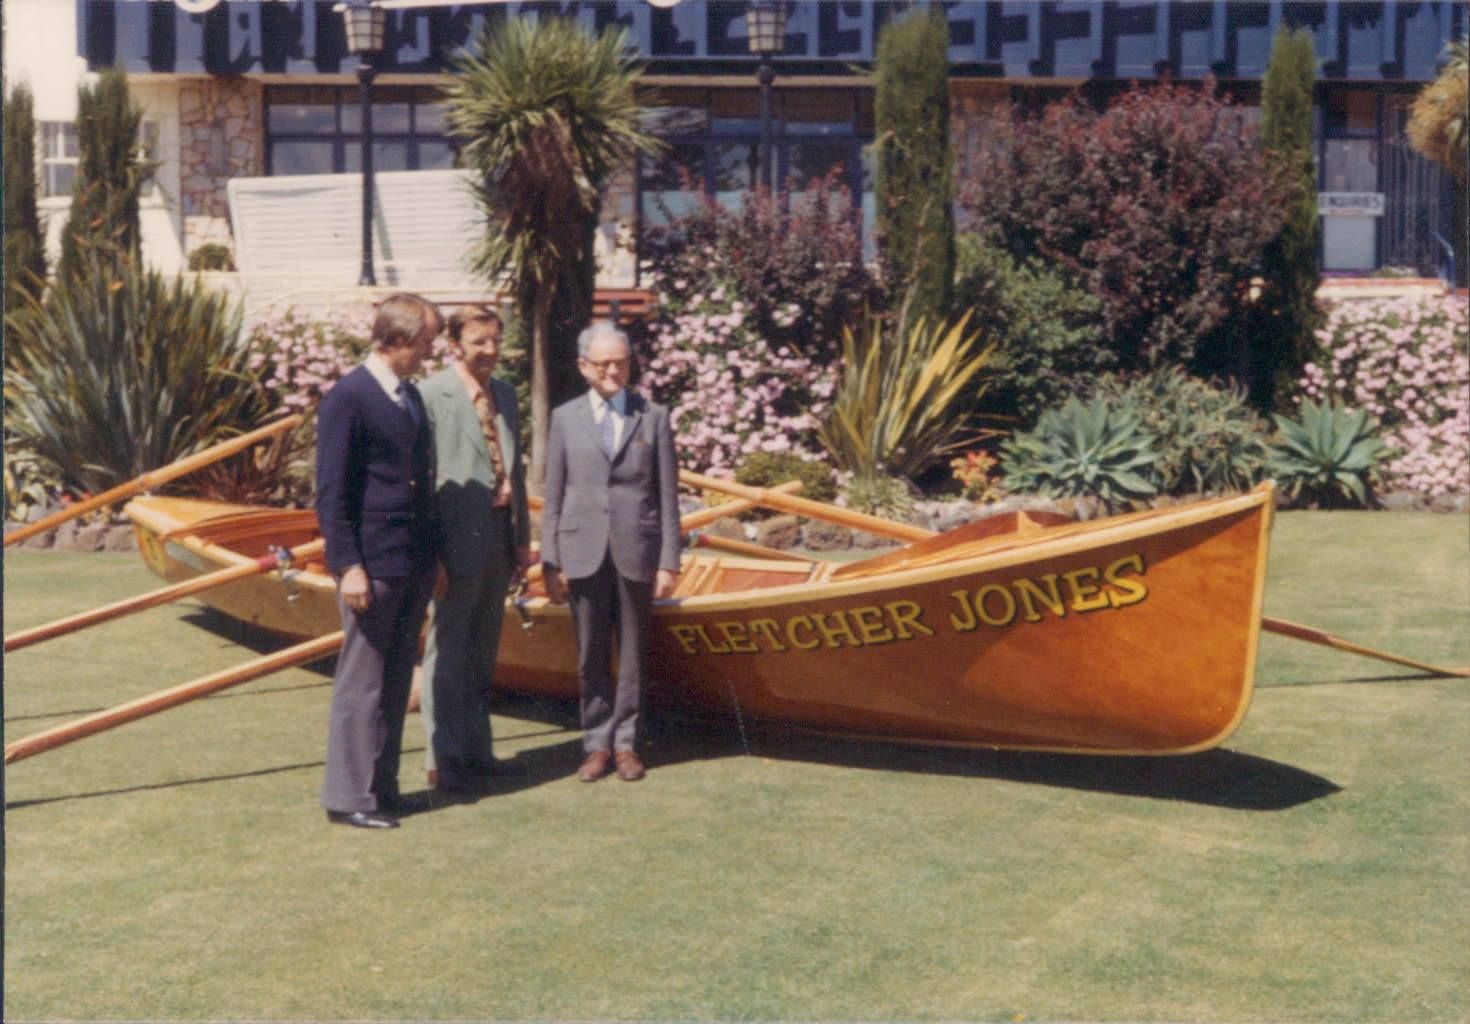 L-R David Jones, Bruce Owen and Neil Symons with the Fletcher Jones surfboat early 1960s. The boat has now been fully restored and is on display at the Warrnambool Surf Club. Photo: shared by David Owen 